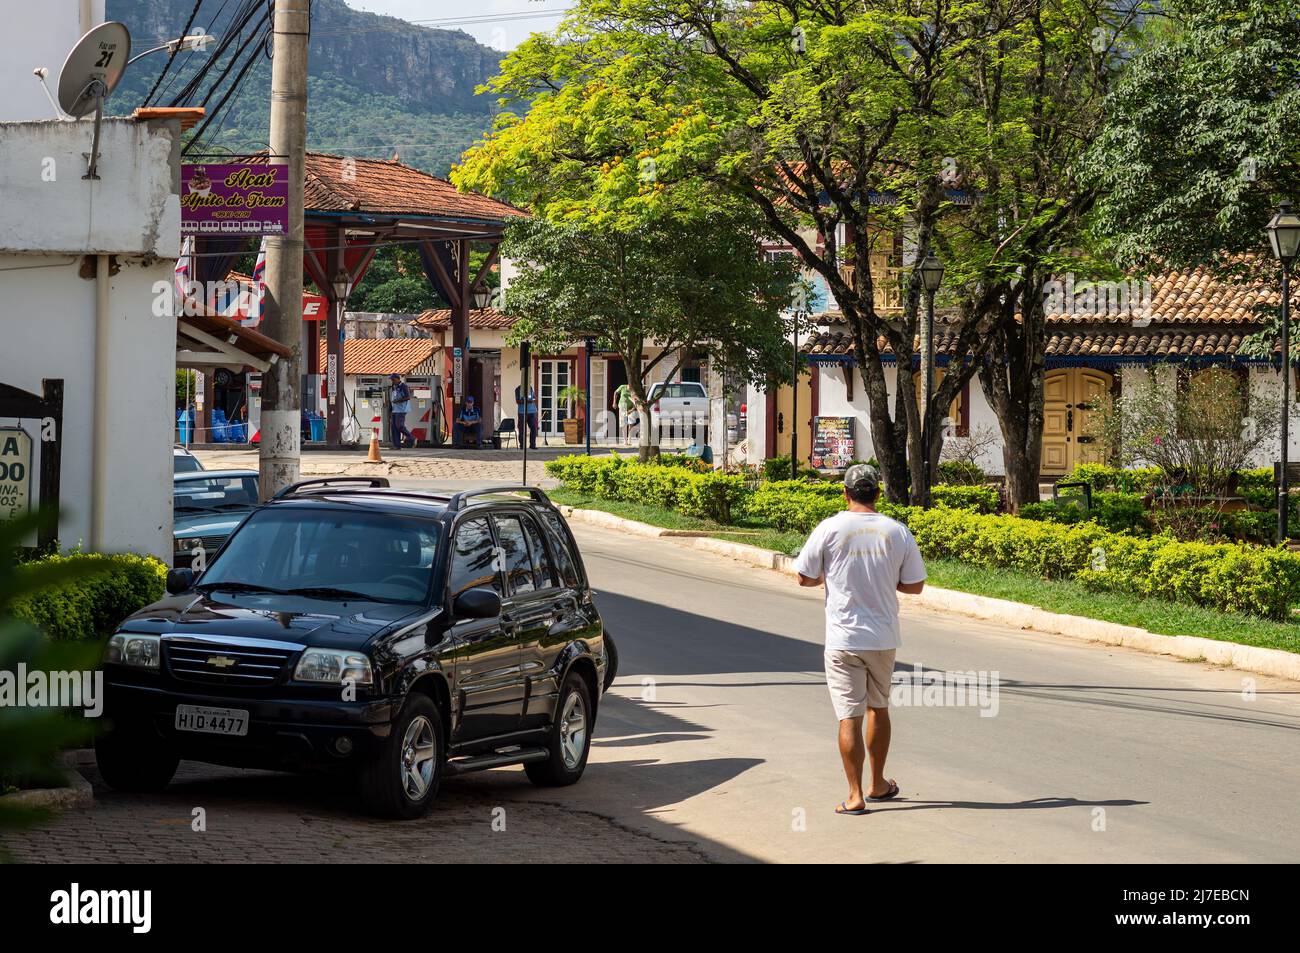 View of Antonio Teixeira Carvalho street close to a public square nearby Tiradentes historical center in a sunny day. Stock Photo